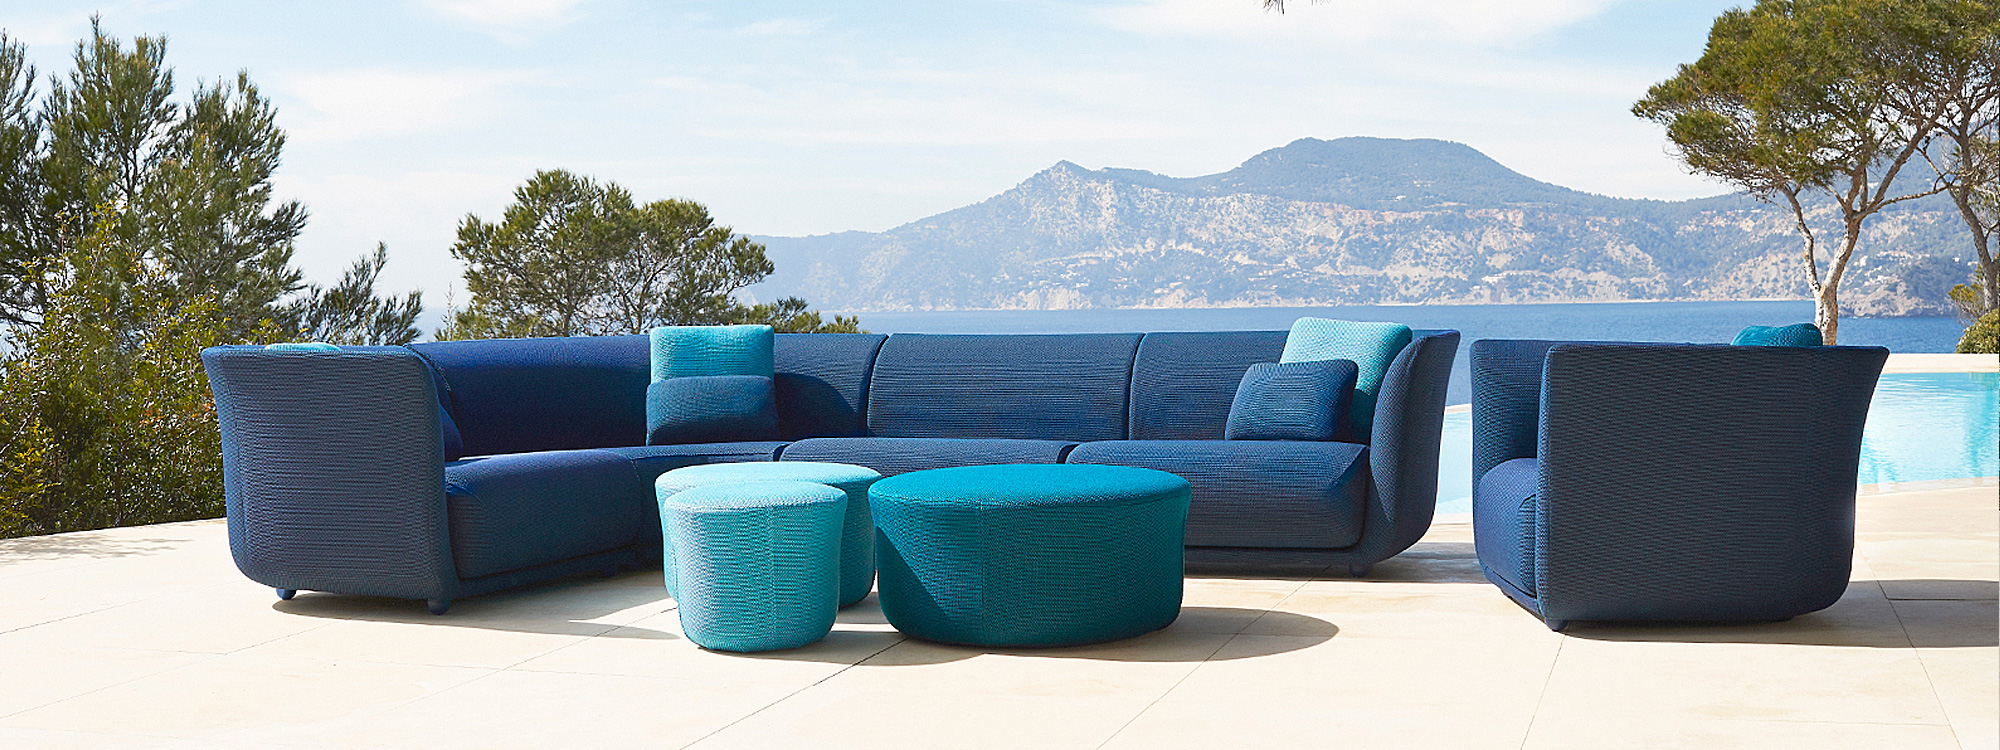 Image of Vondom Suave contemporary garden sofa in blue fabric by Marcel Wanders